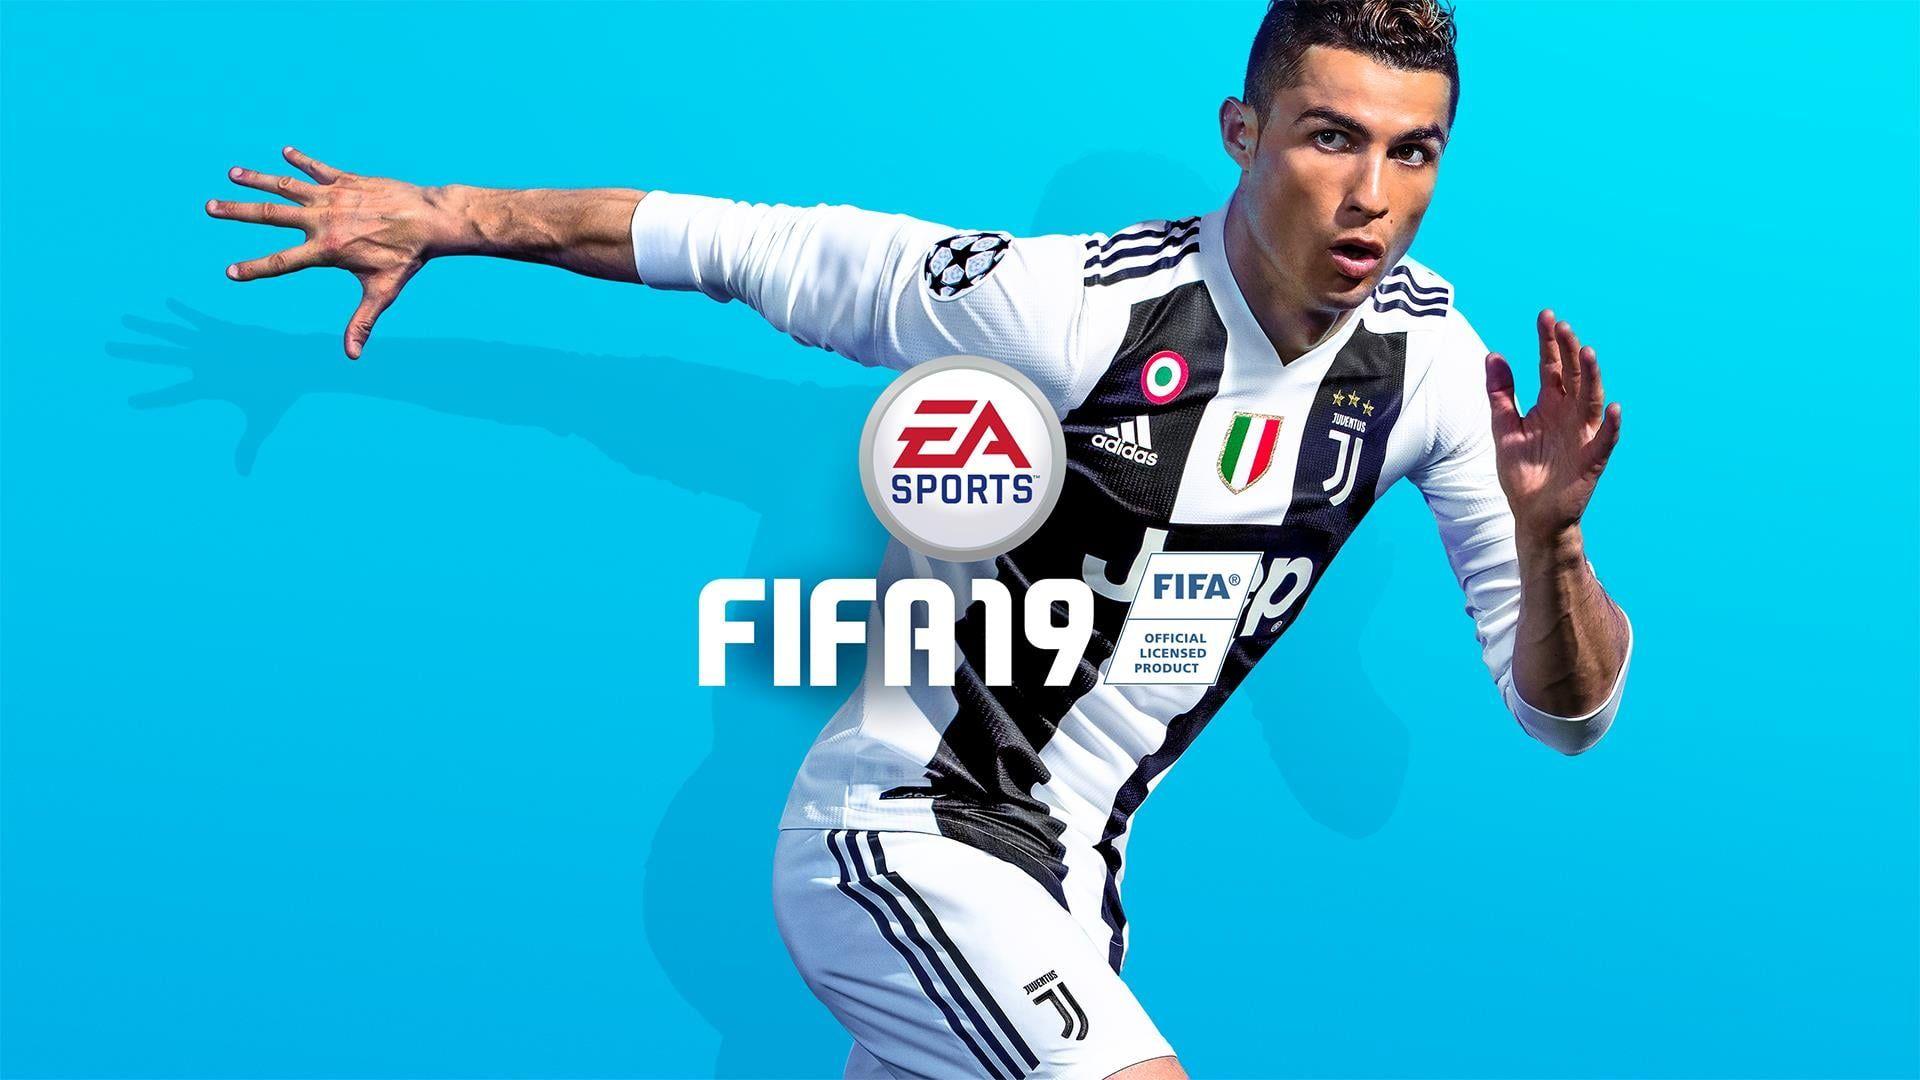 FIFA 19 Demo Set to Release on September 13th